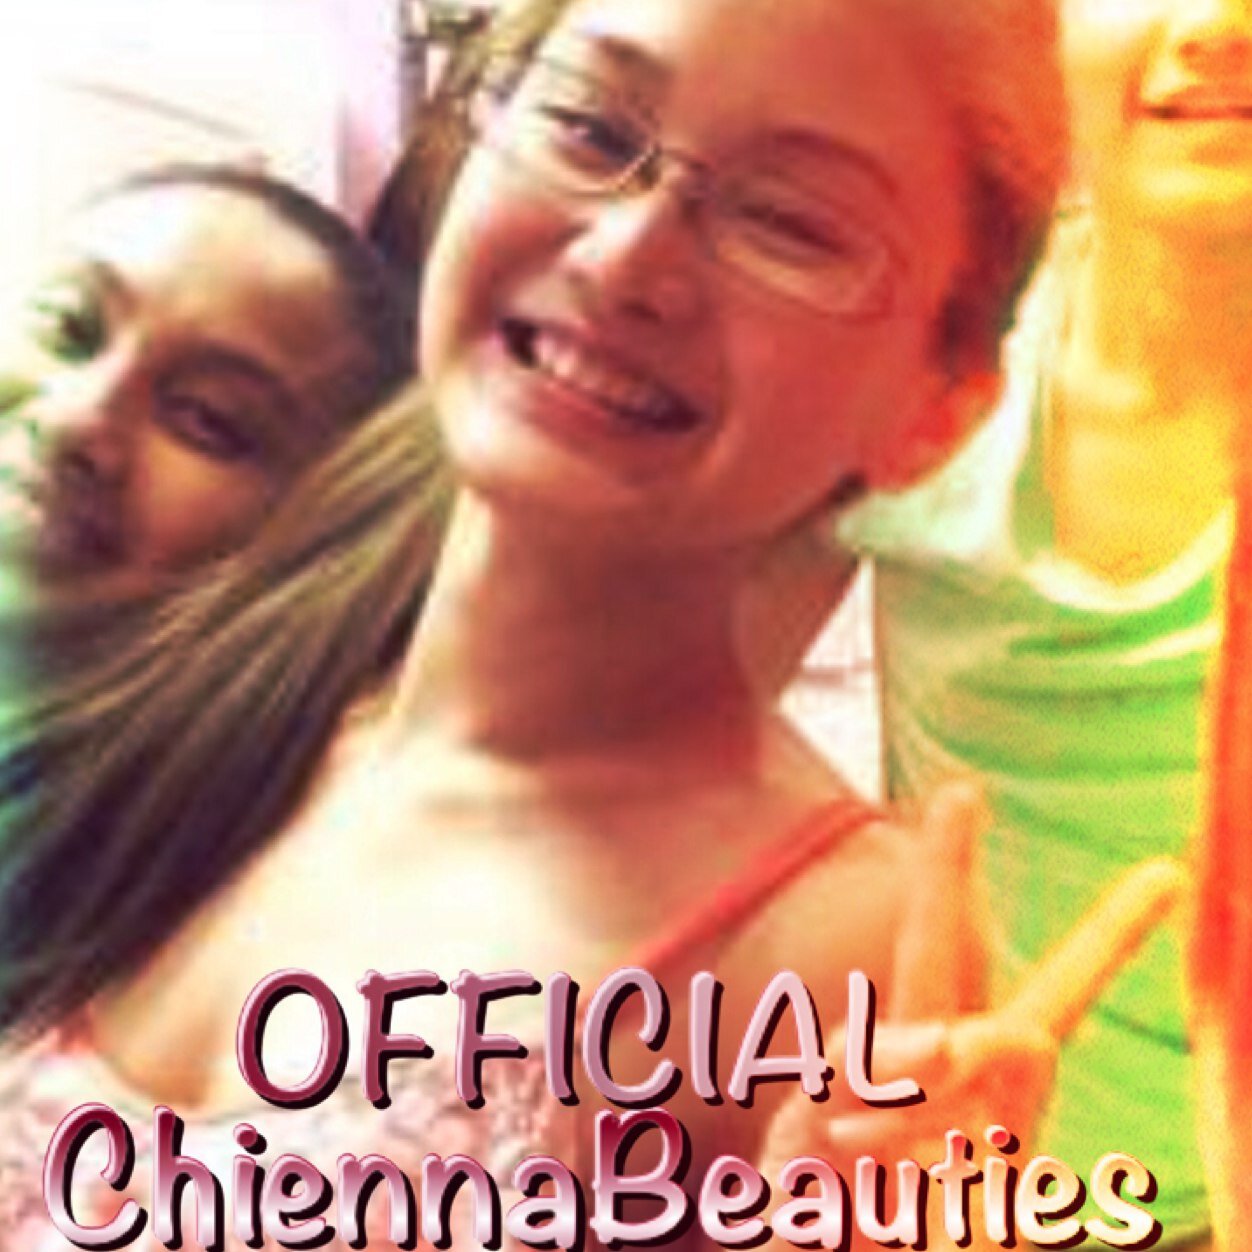 We will be the anchor that will keeps Chienna's Feet on the Ground. One Love for Chienna Filomeno. One Love, One group.